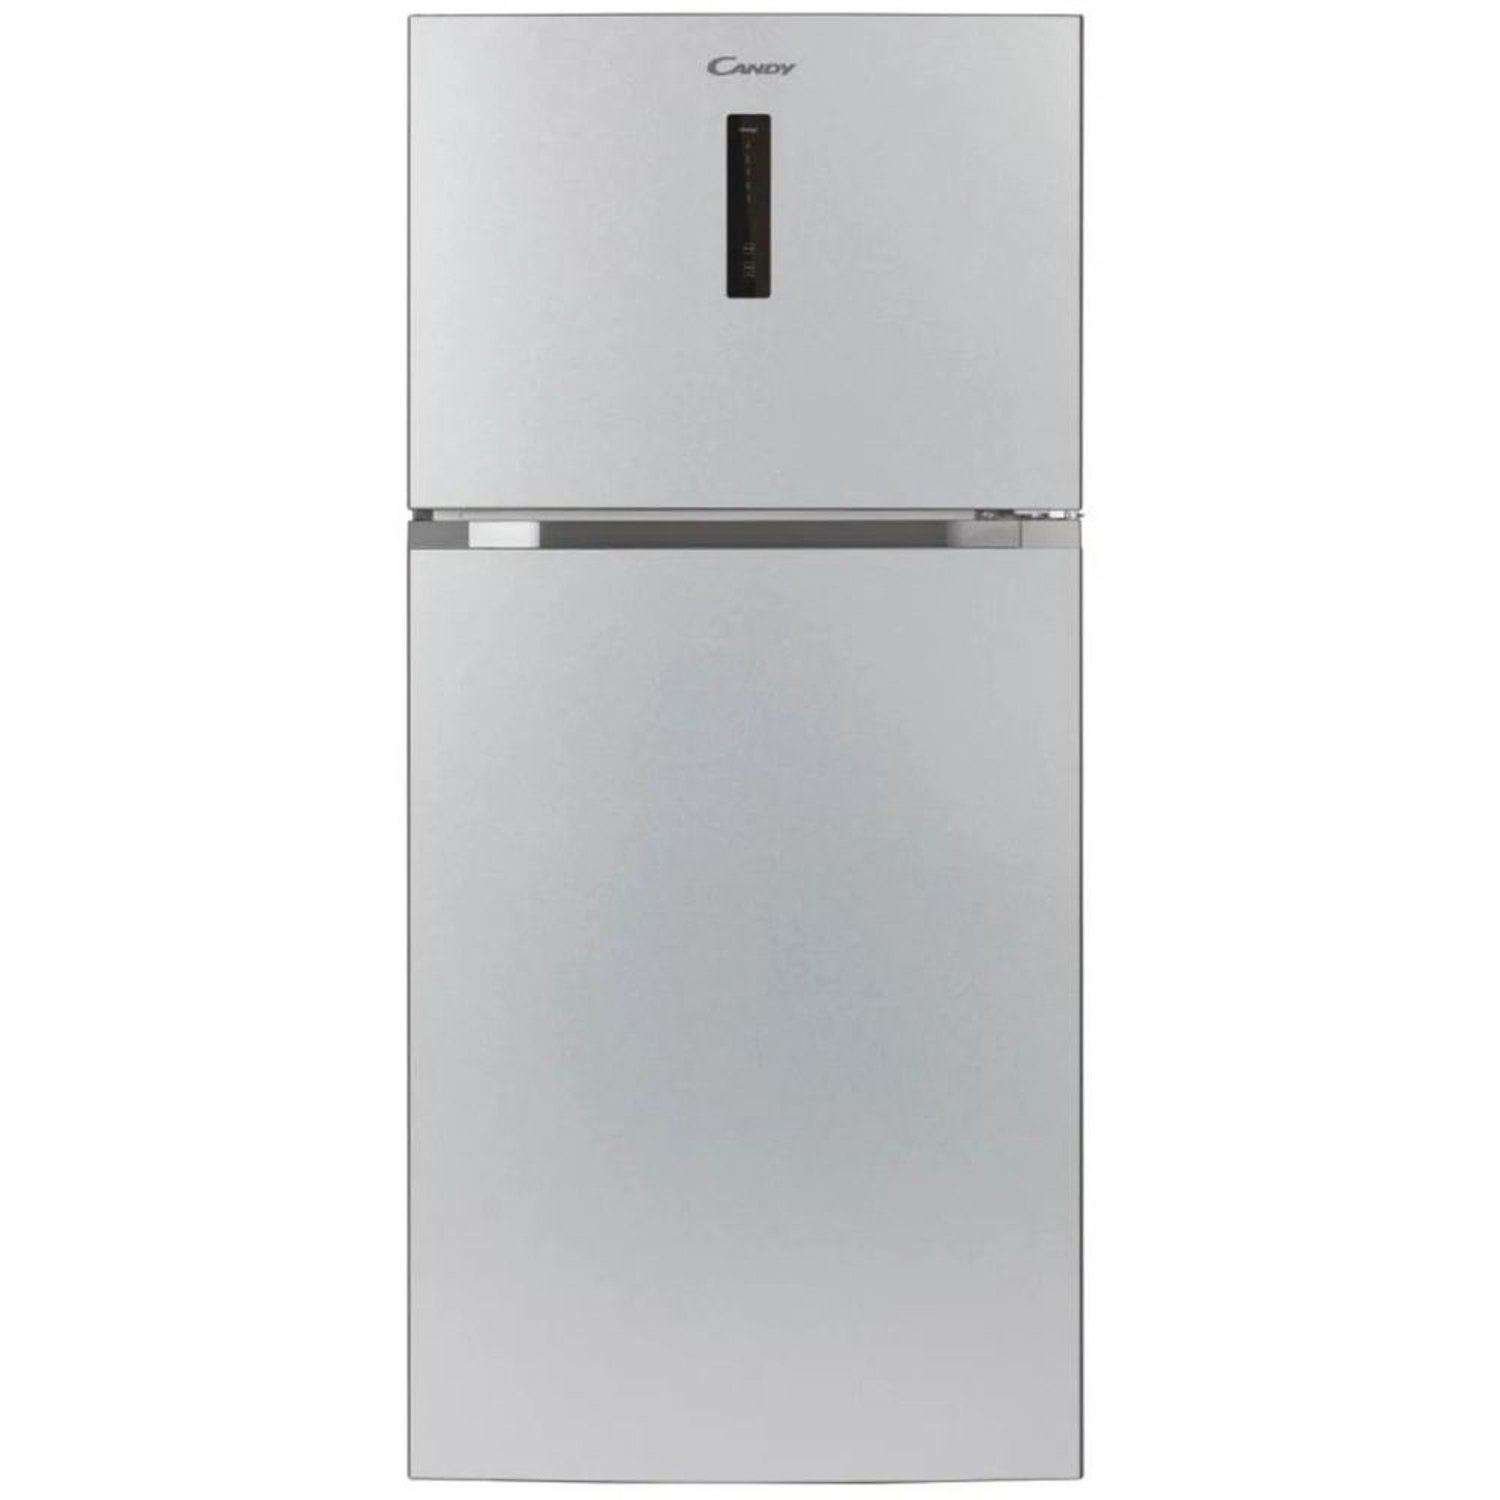 Candy 700L Top Mount Refrigerator CCDNI700DS19